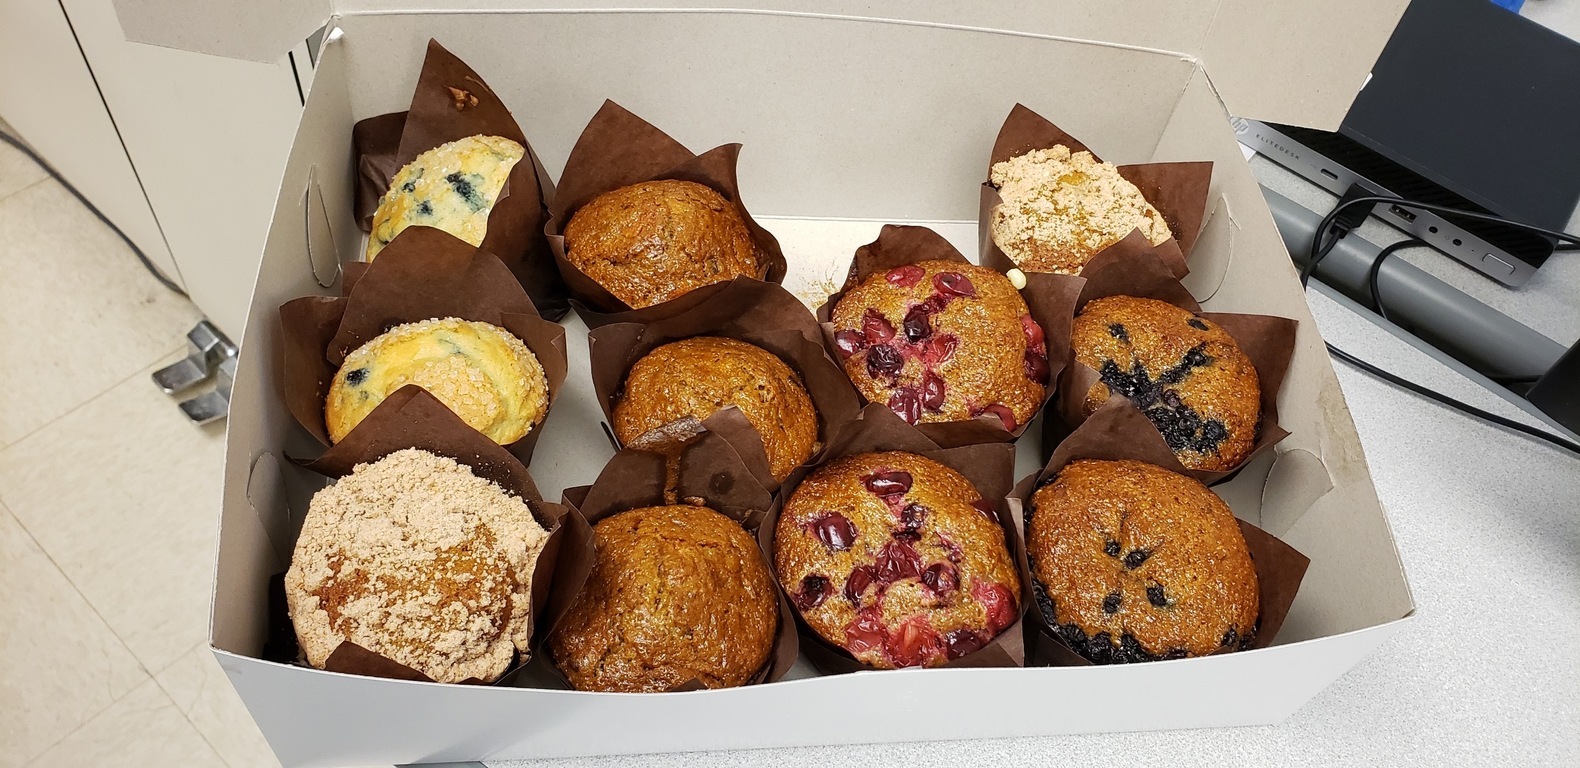 M.T.O. Berkeley Provides Sweets to Nurses and Therapists at Kaiser Medical Center